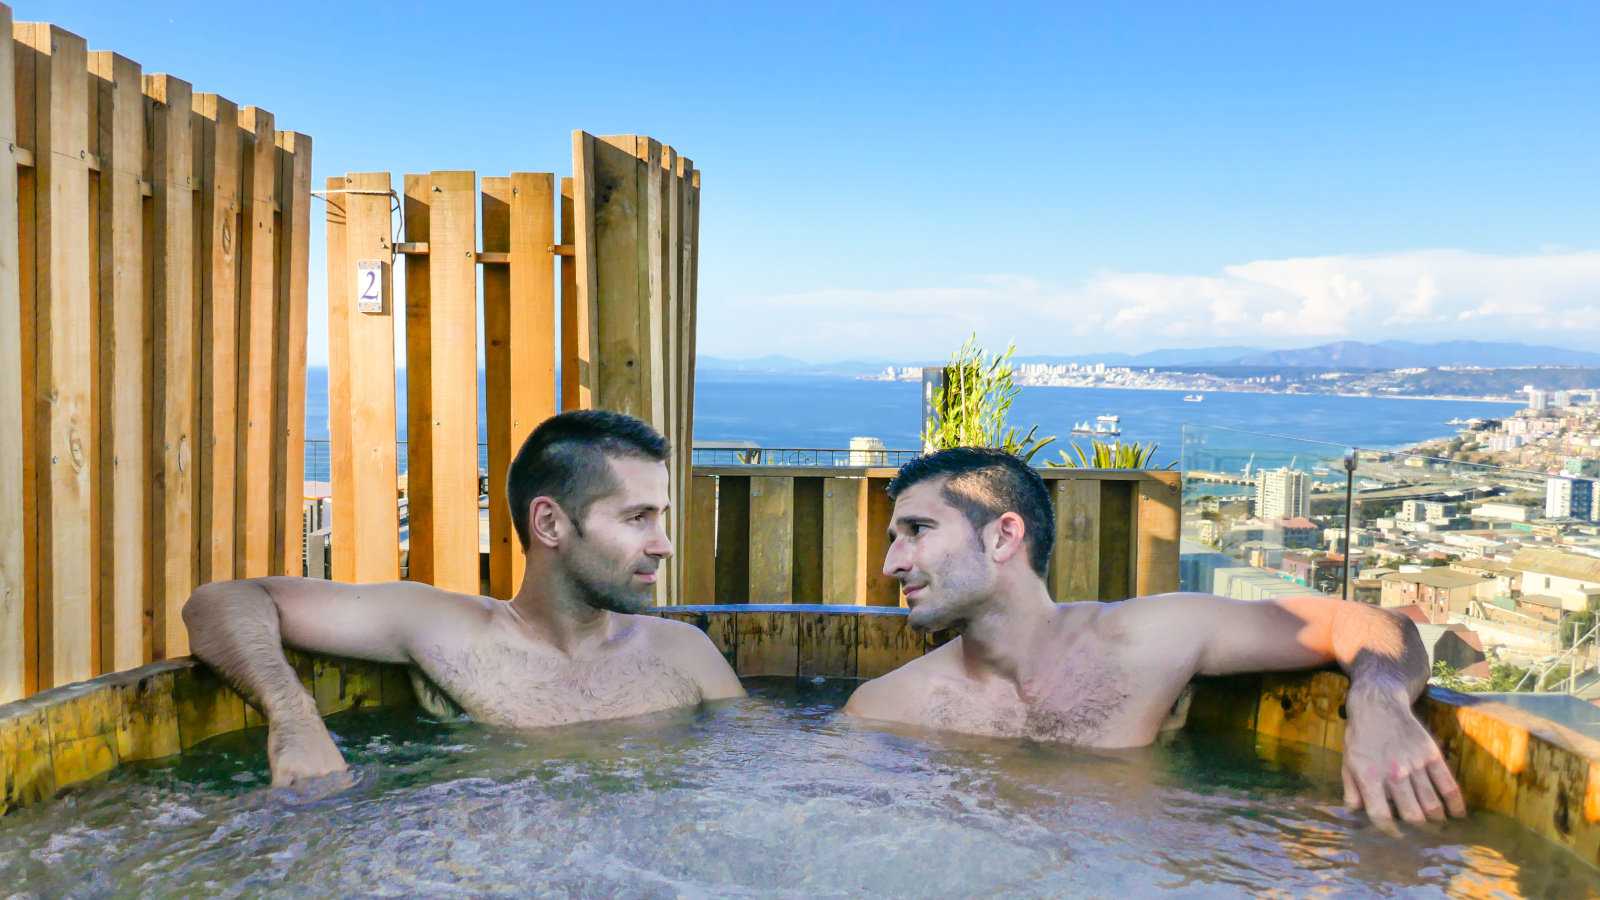 Verso Hotel is a stylish and gay friendly choice in Valparaiso, with rooftop hot tubs!